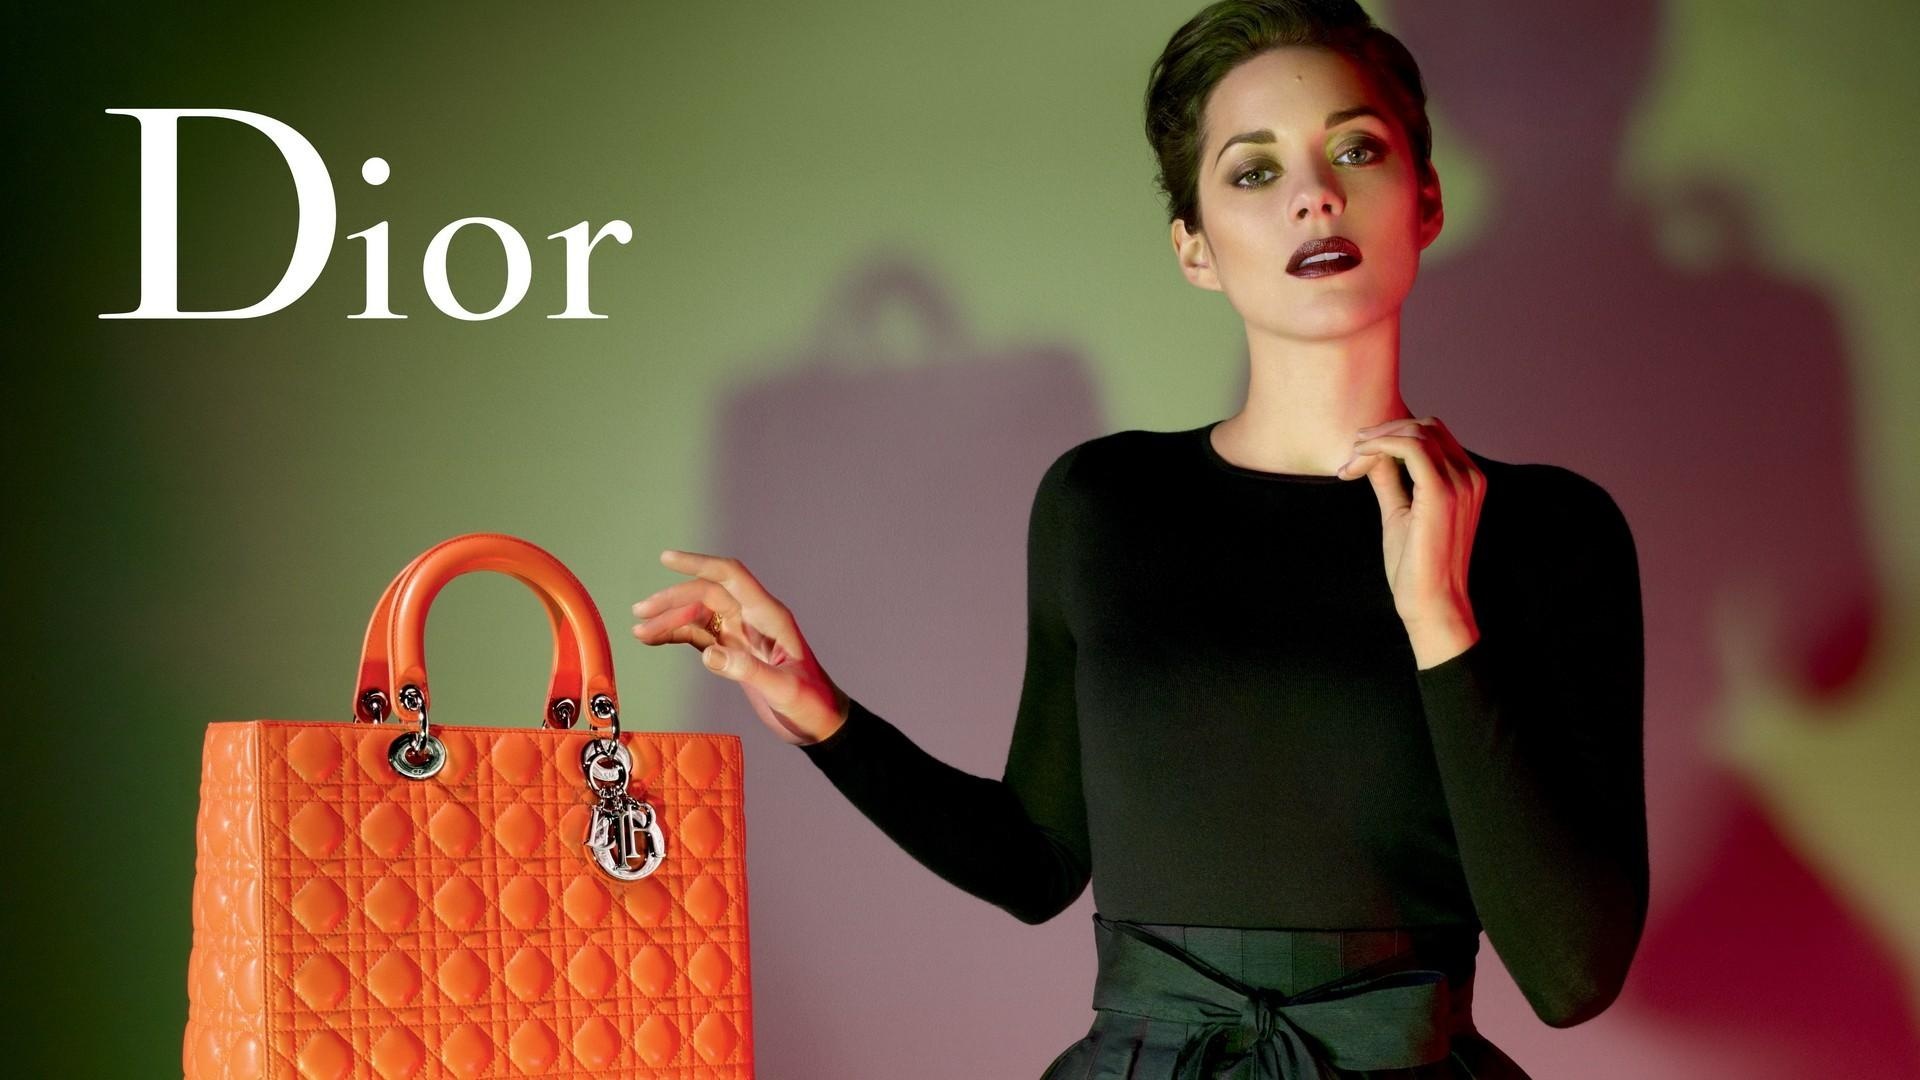 Dior: French actress and face of the brand, Marion Cotillard, Dior's iconic bag. 1920x1080 Full HD Background.